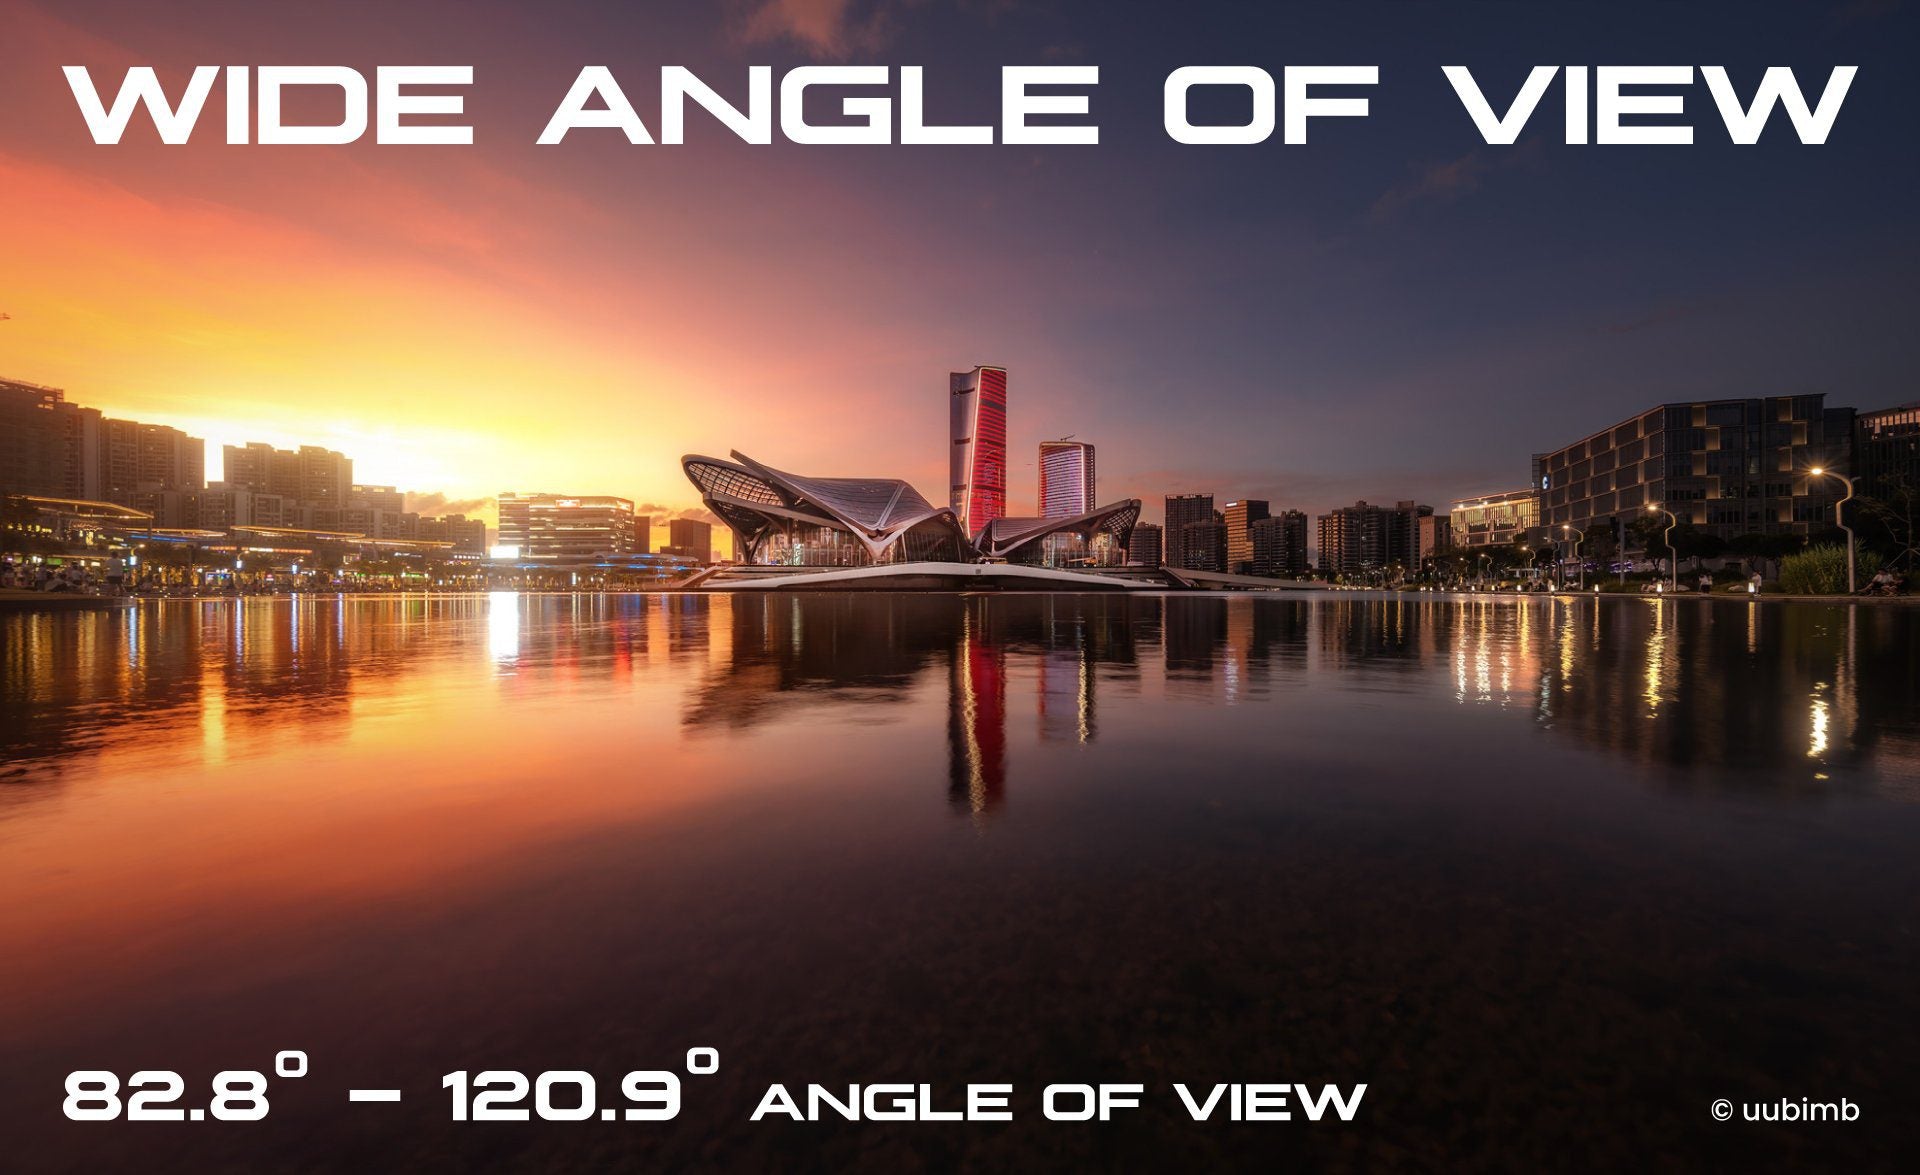 Wide angle of view example photo of a city scape and sunset